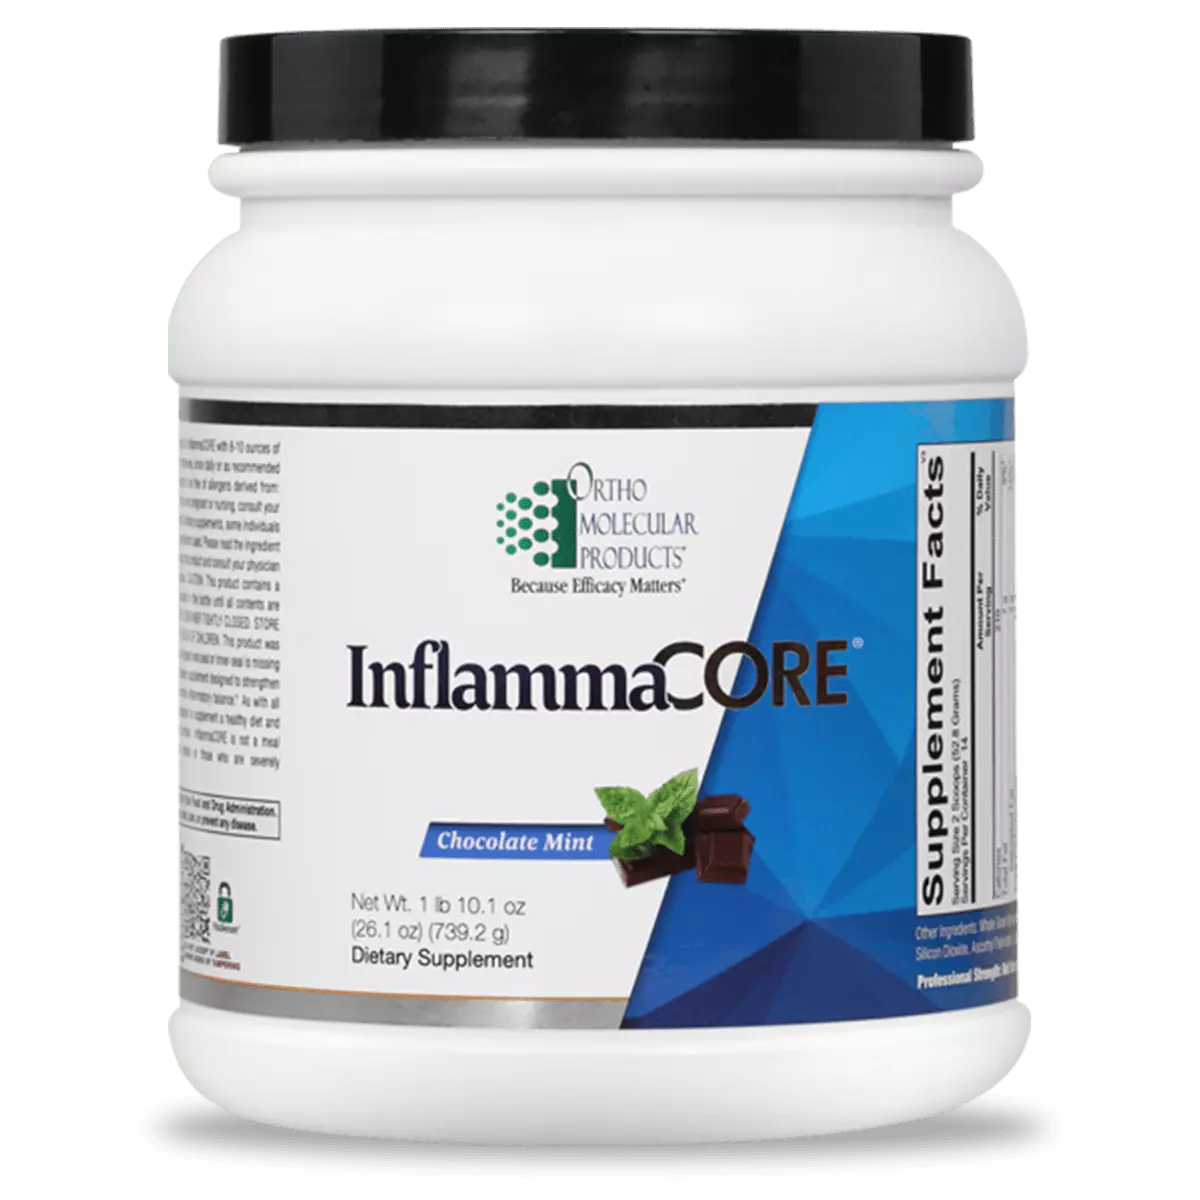 InflammaCORE Chocolate Mint